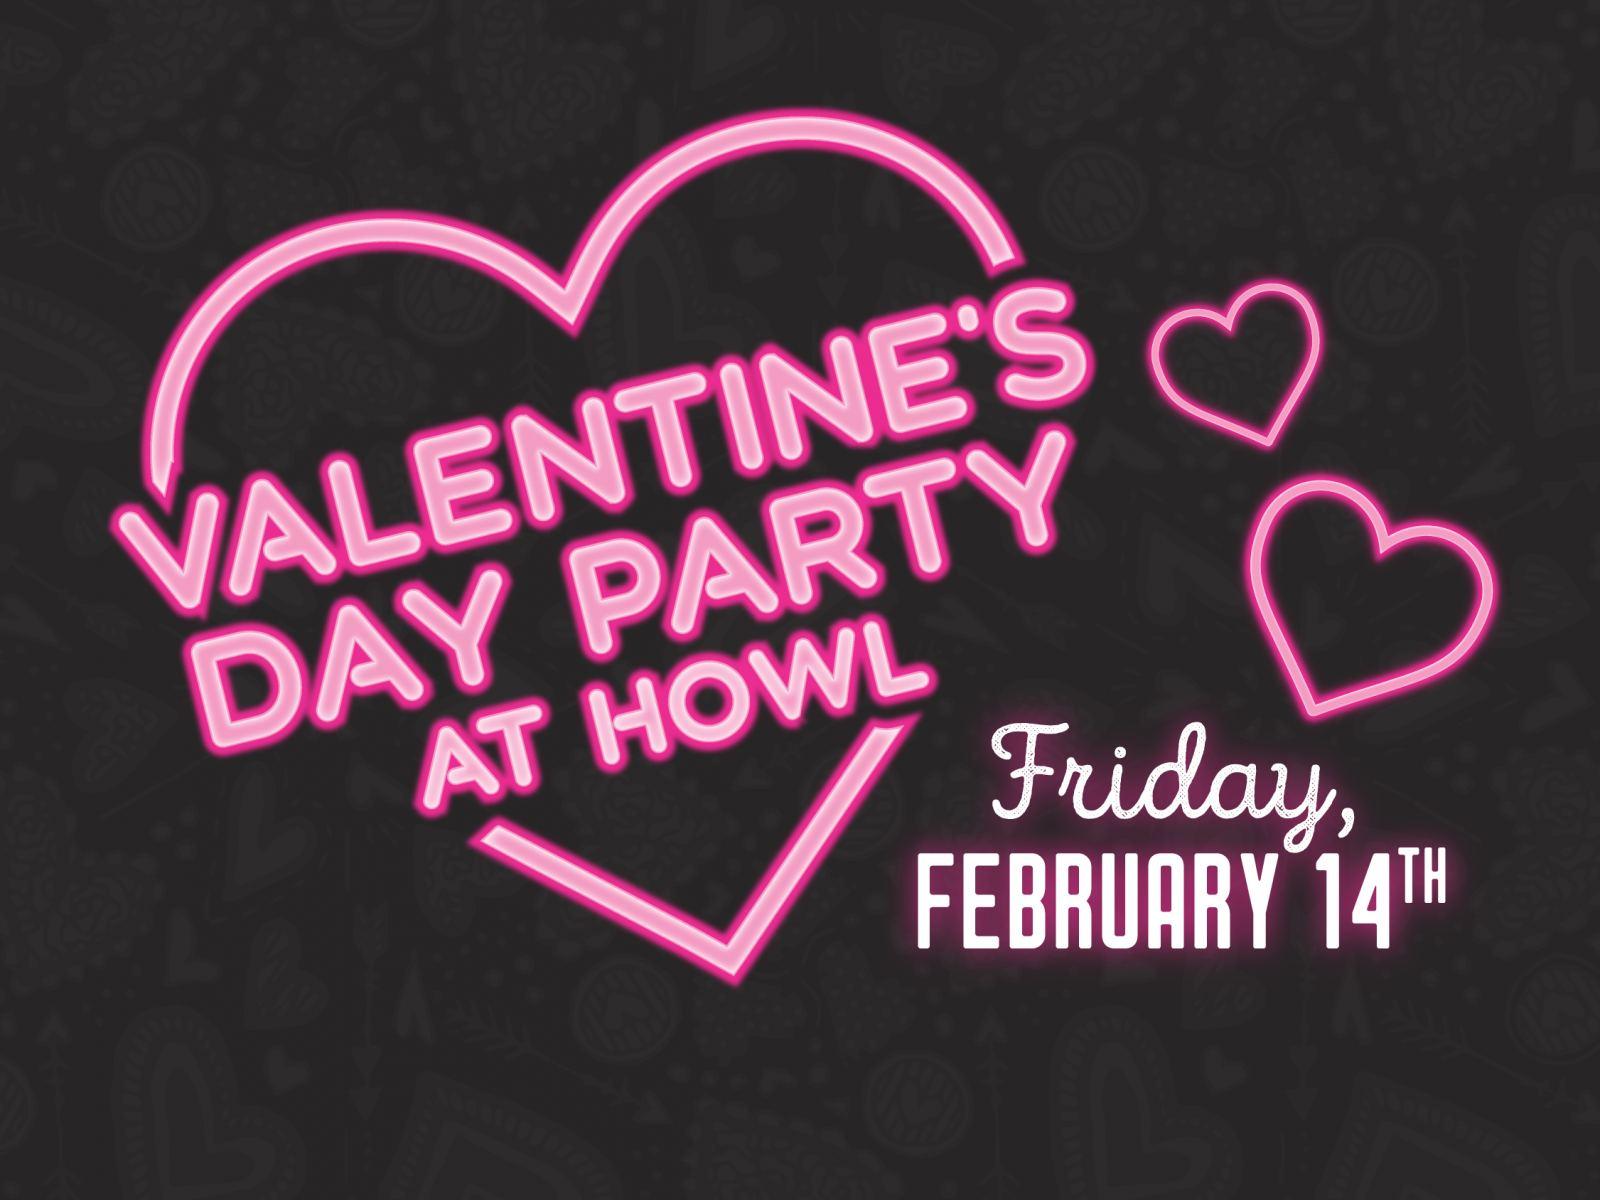 Valentine's Day Party at Howl at the Moon. Discover Los Angeles